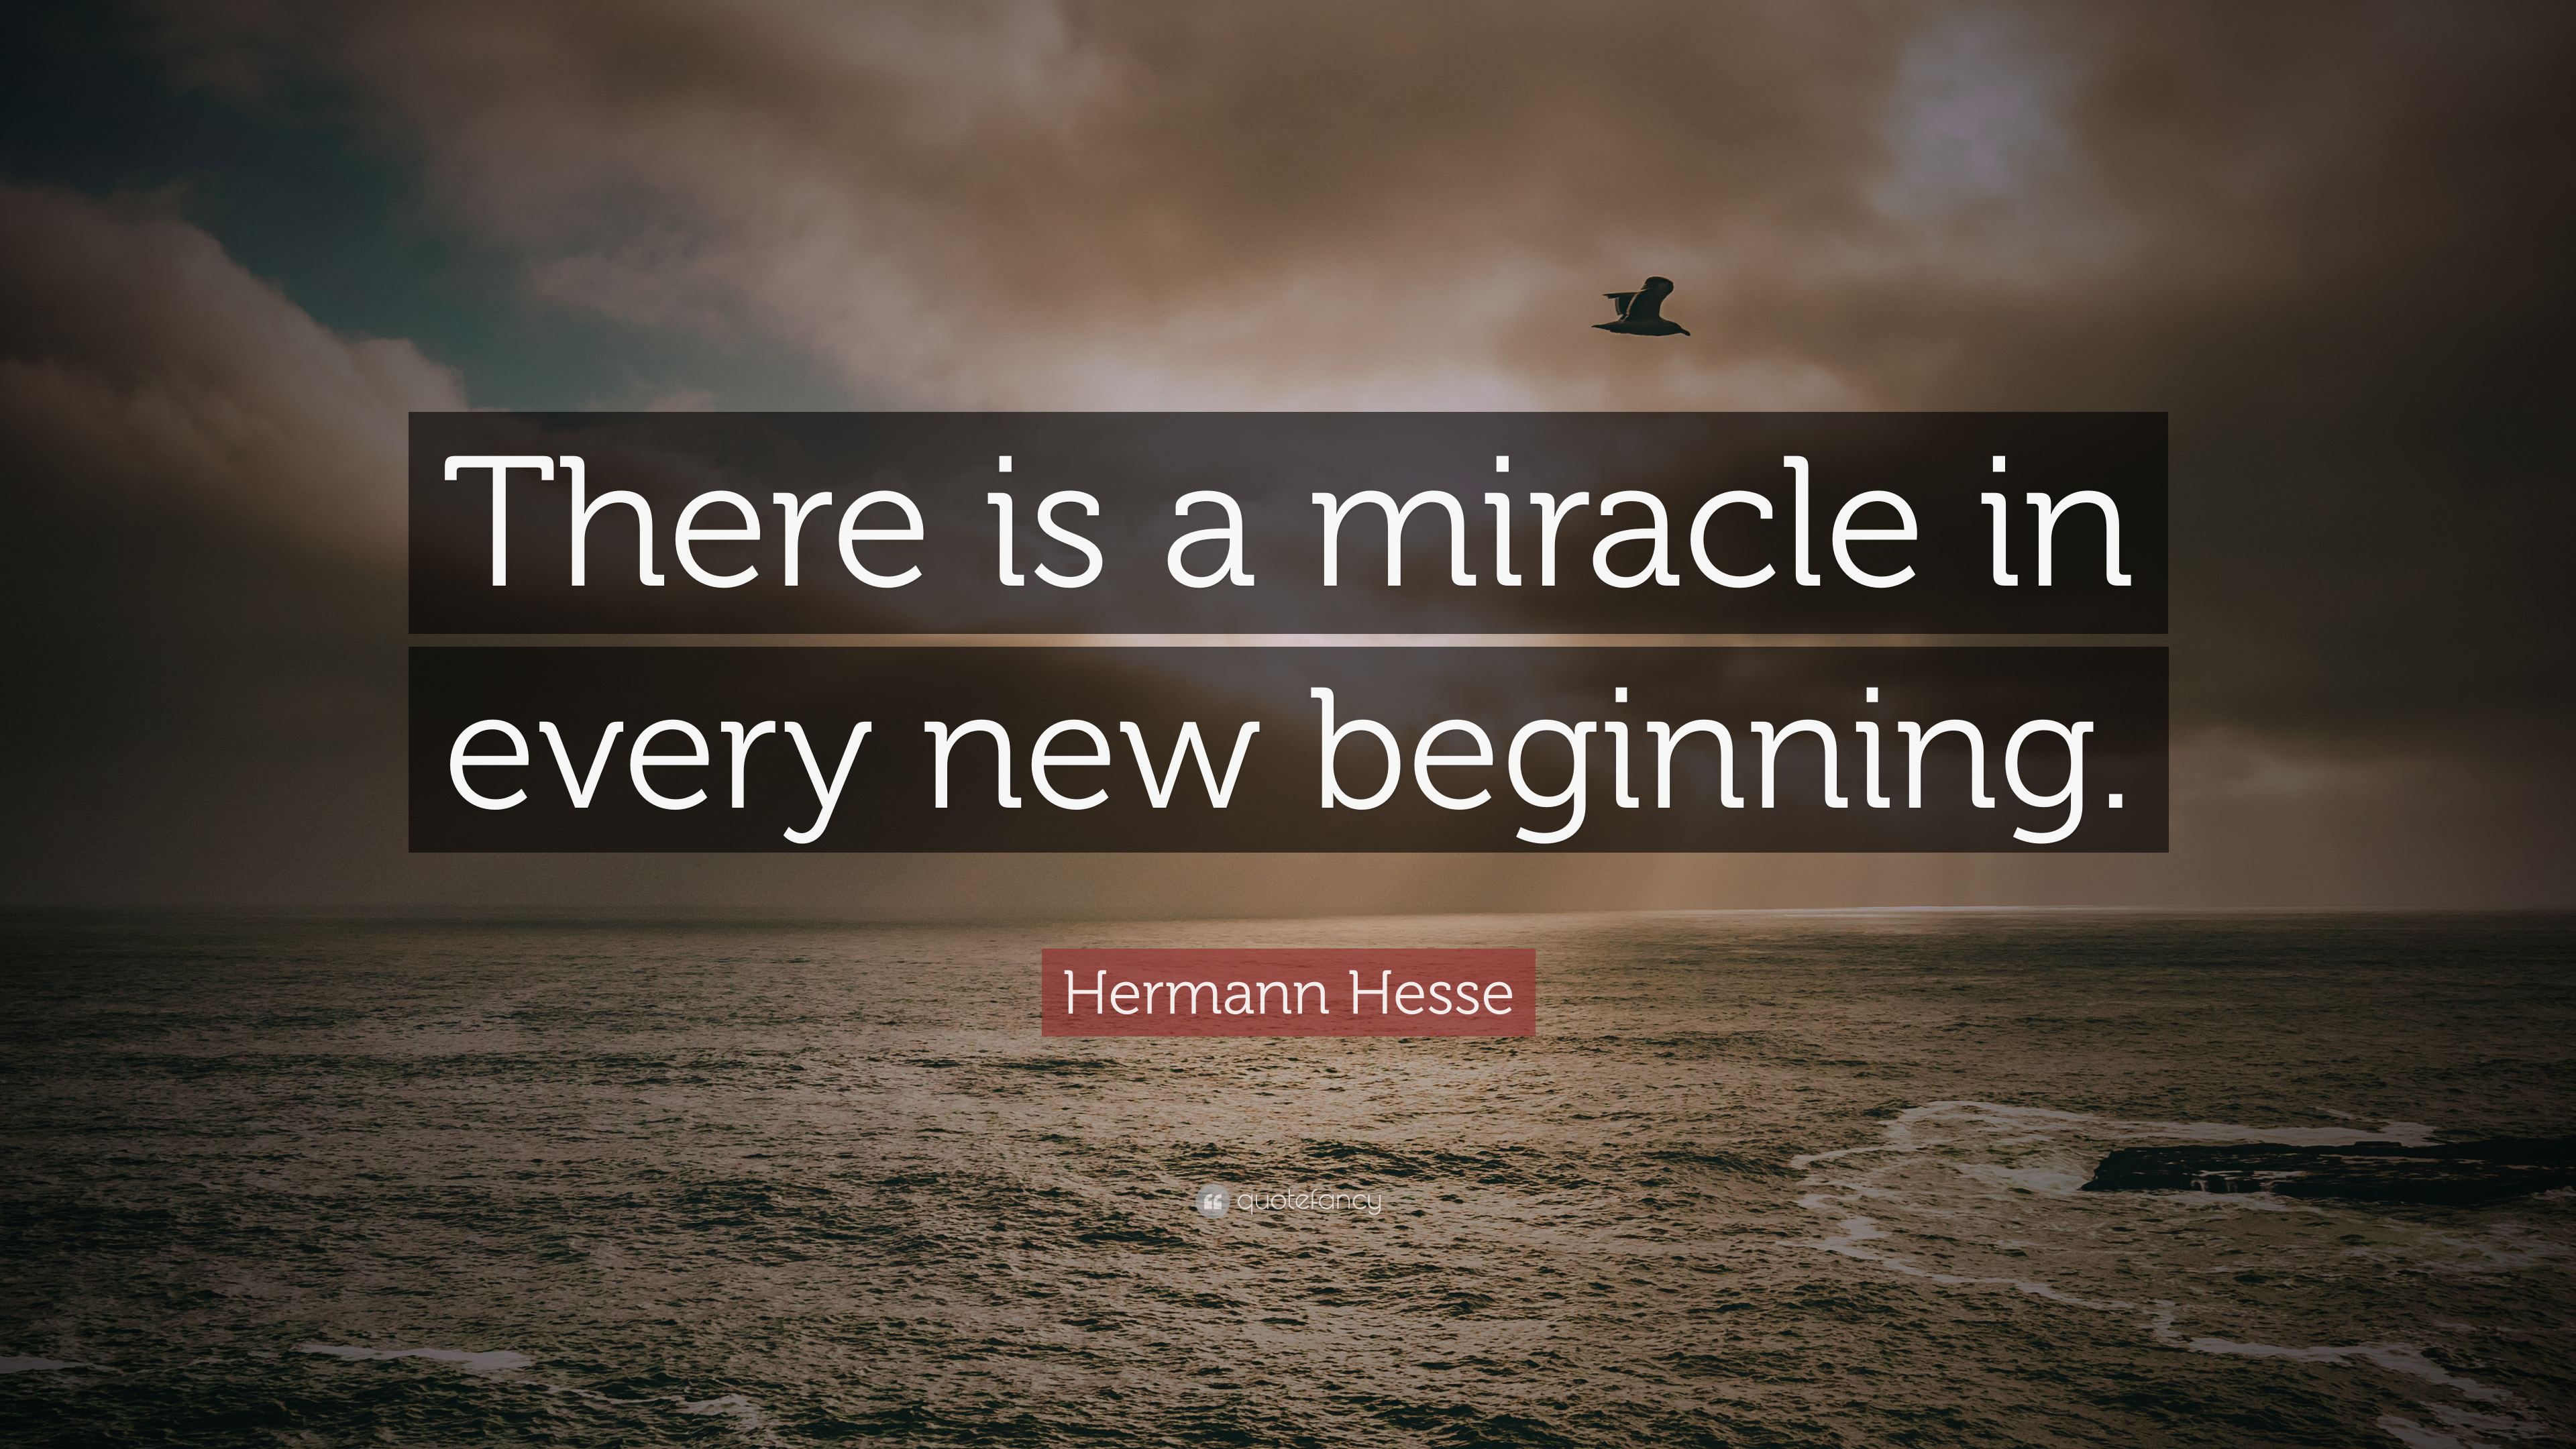 4778656-hermann-hesse-quote-there-is-a-miracle-in-every-new-beginning.jpg